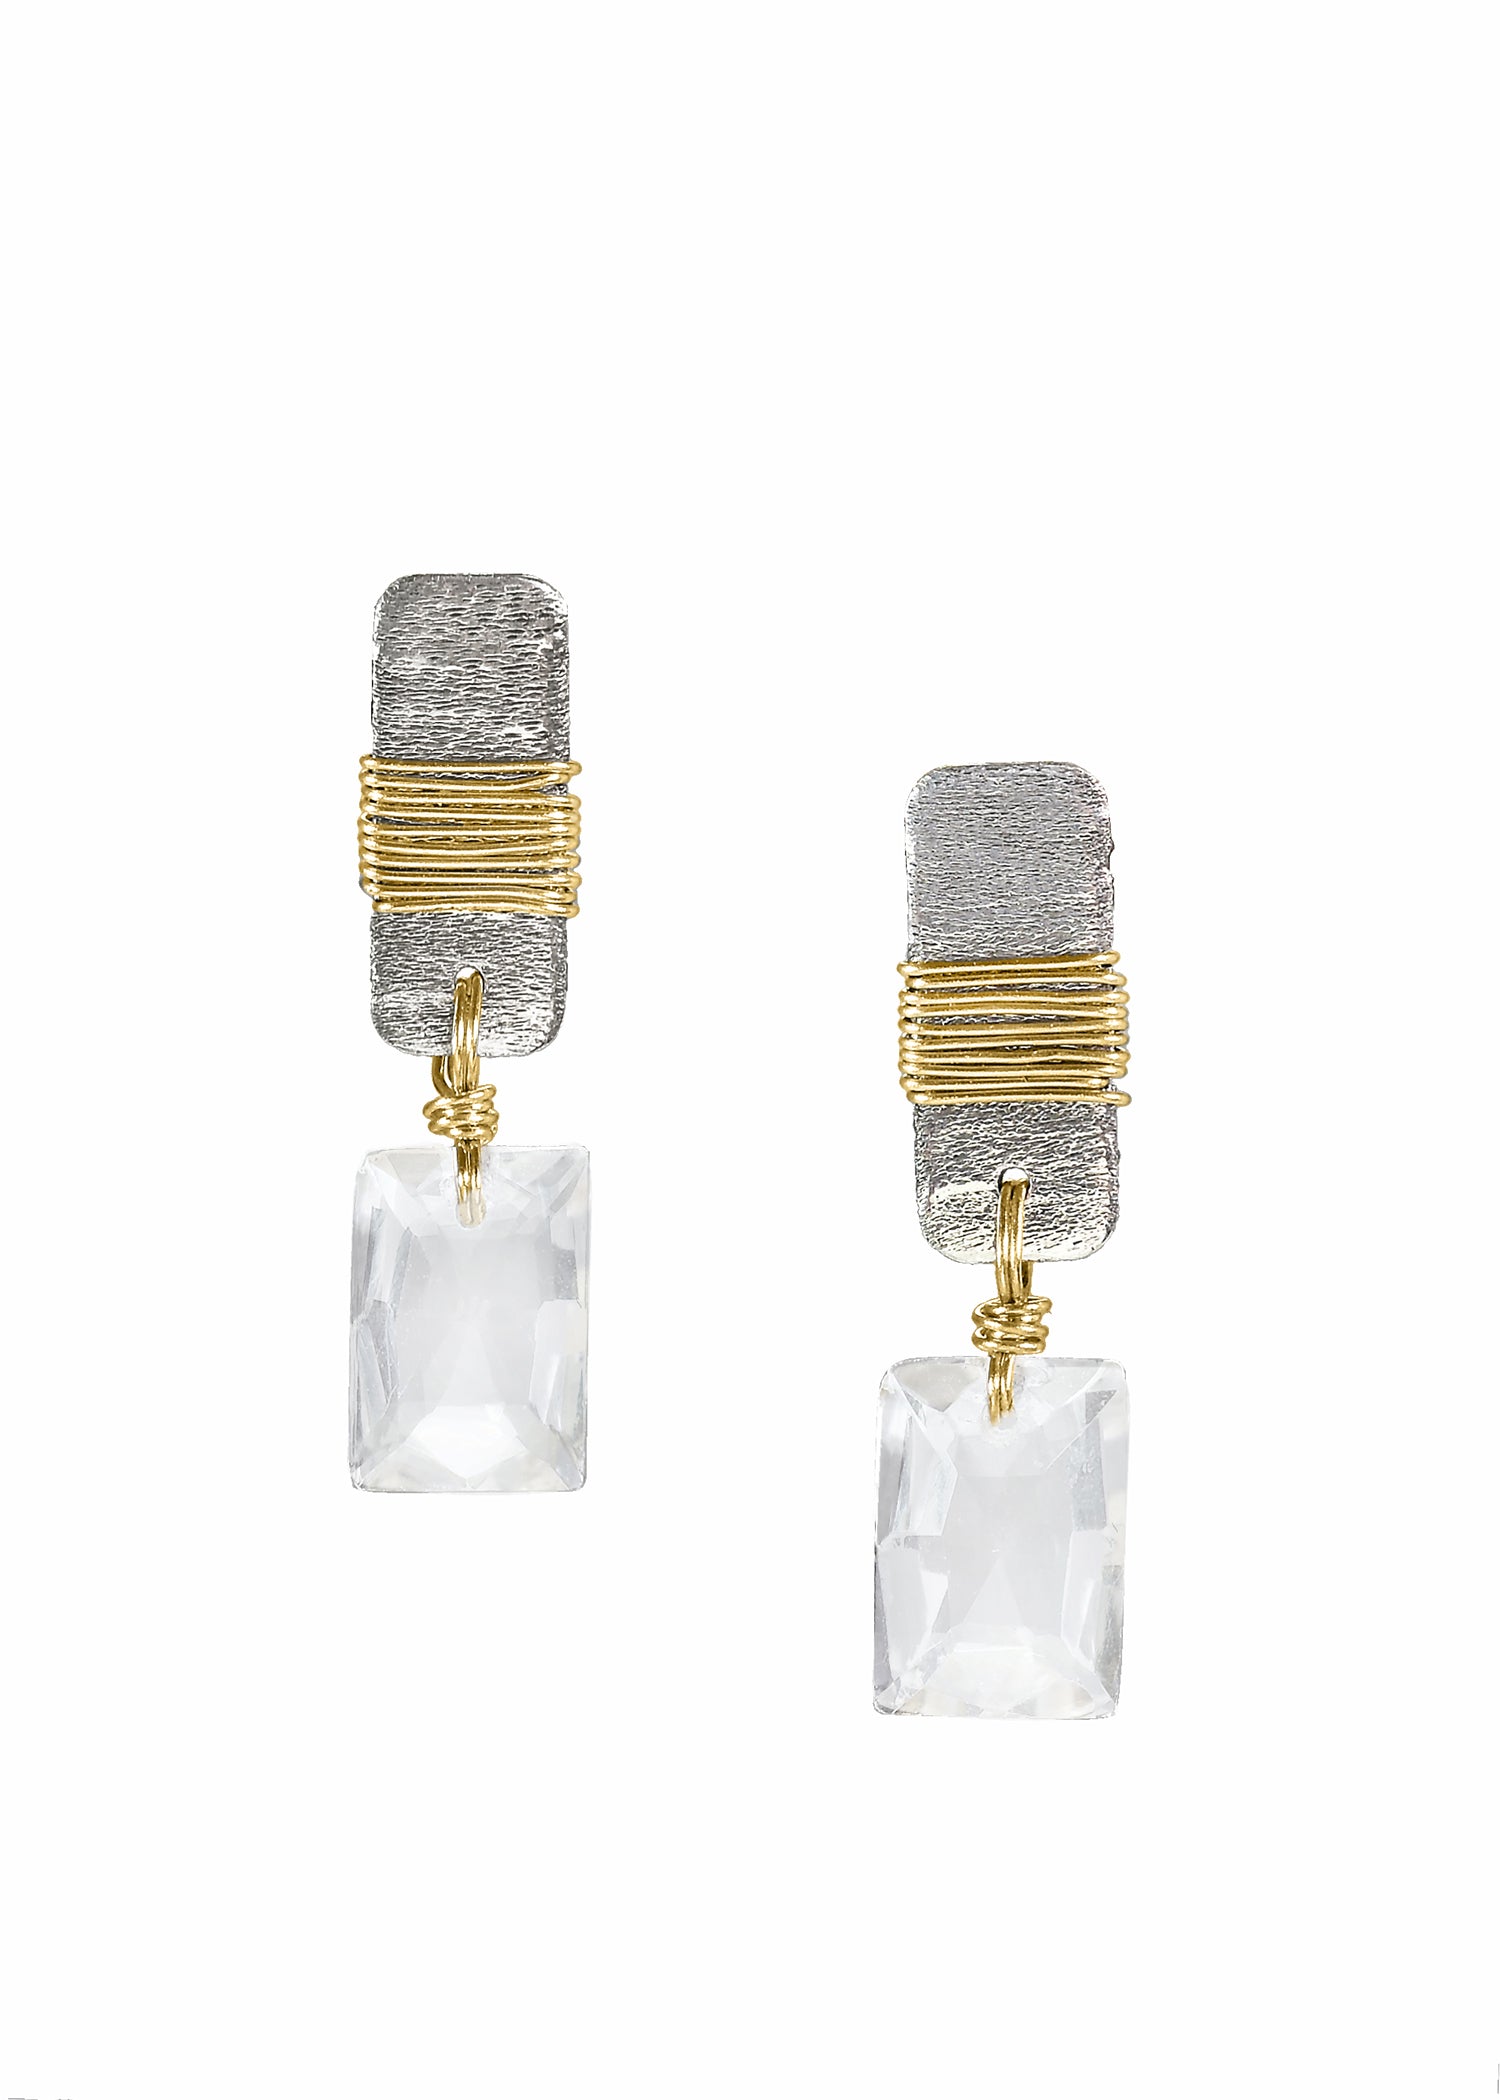 White topaz 14k gold Sterling silver Mixed metal Earrings measure 3/4" in length (including the posts) and 3/16" in width Handmade in our Los Angeles studio